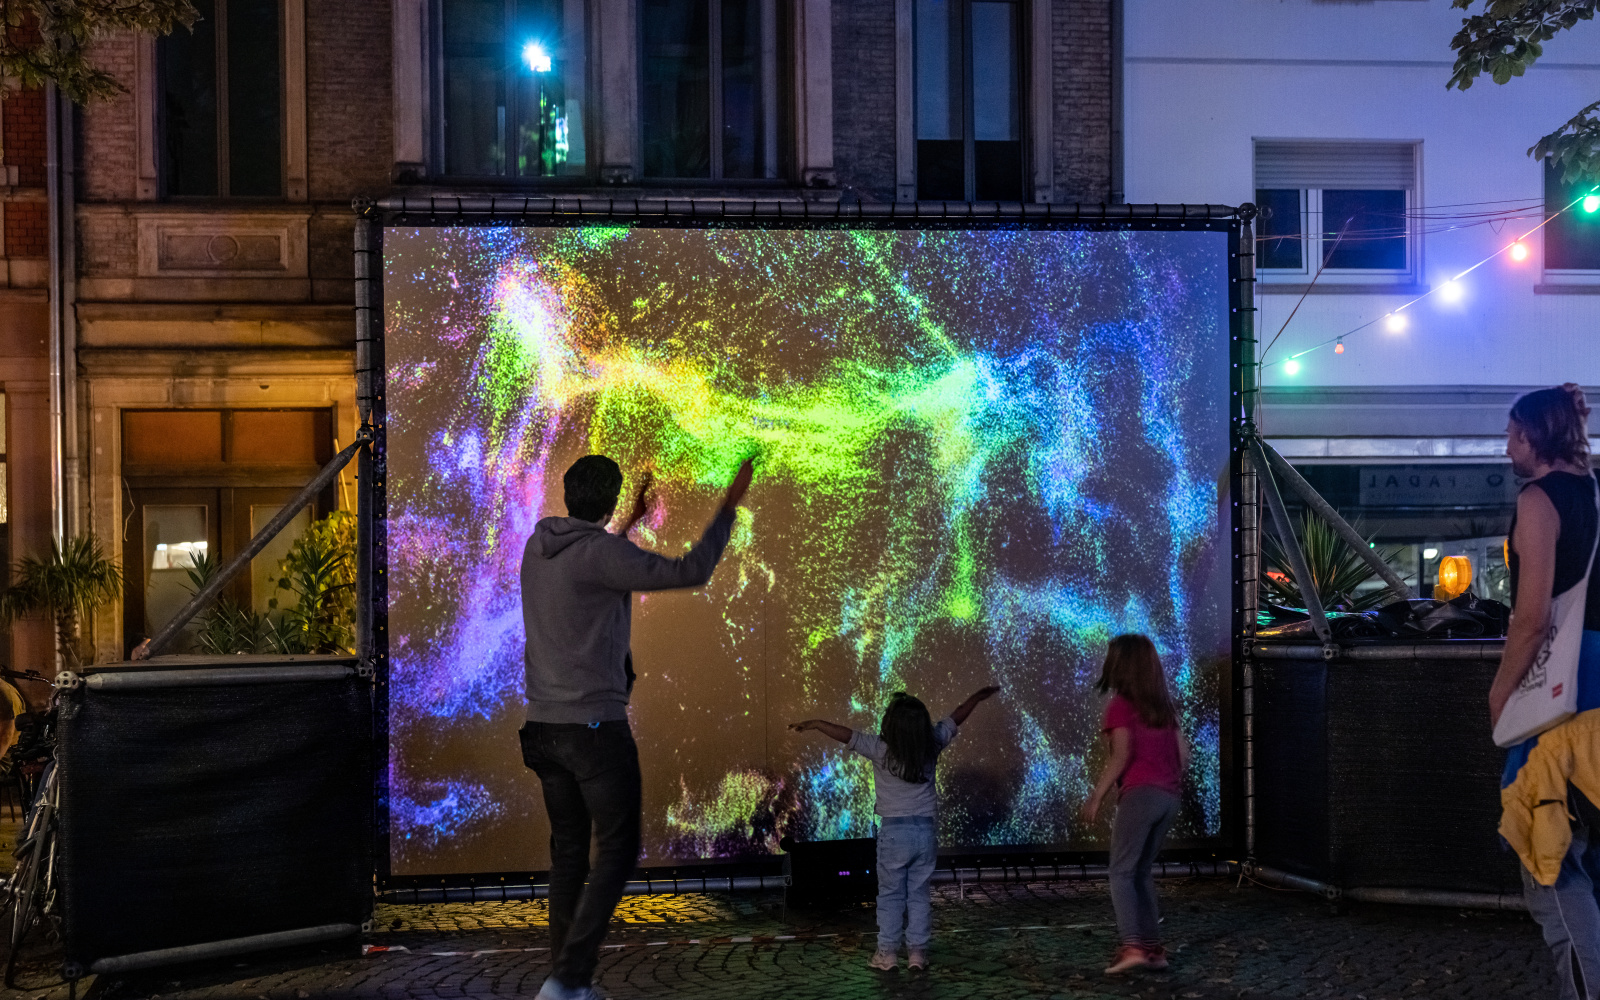 In the pedestrian zone there is a screen with brightly colored particles, and adults and children move in front of it.